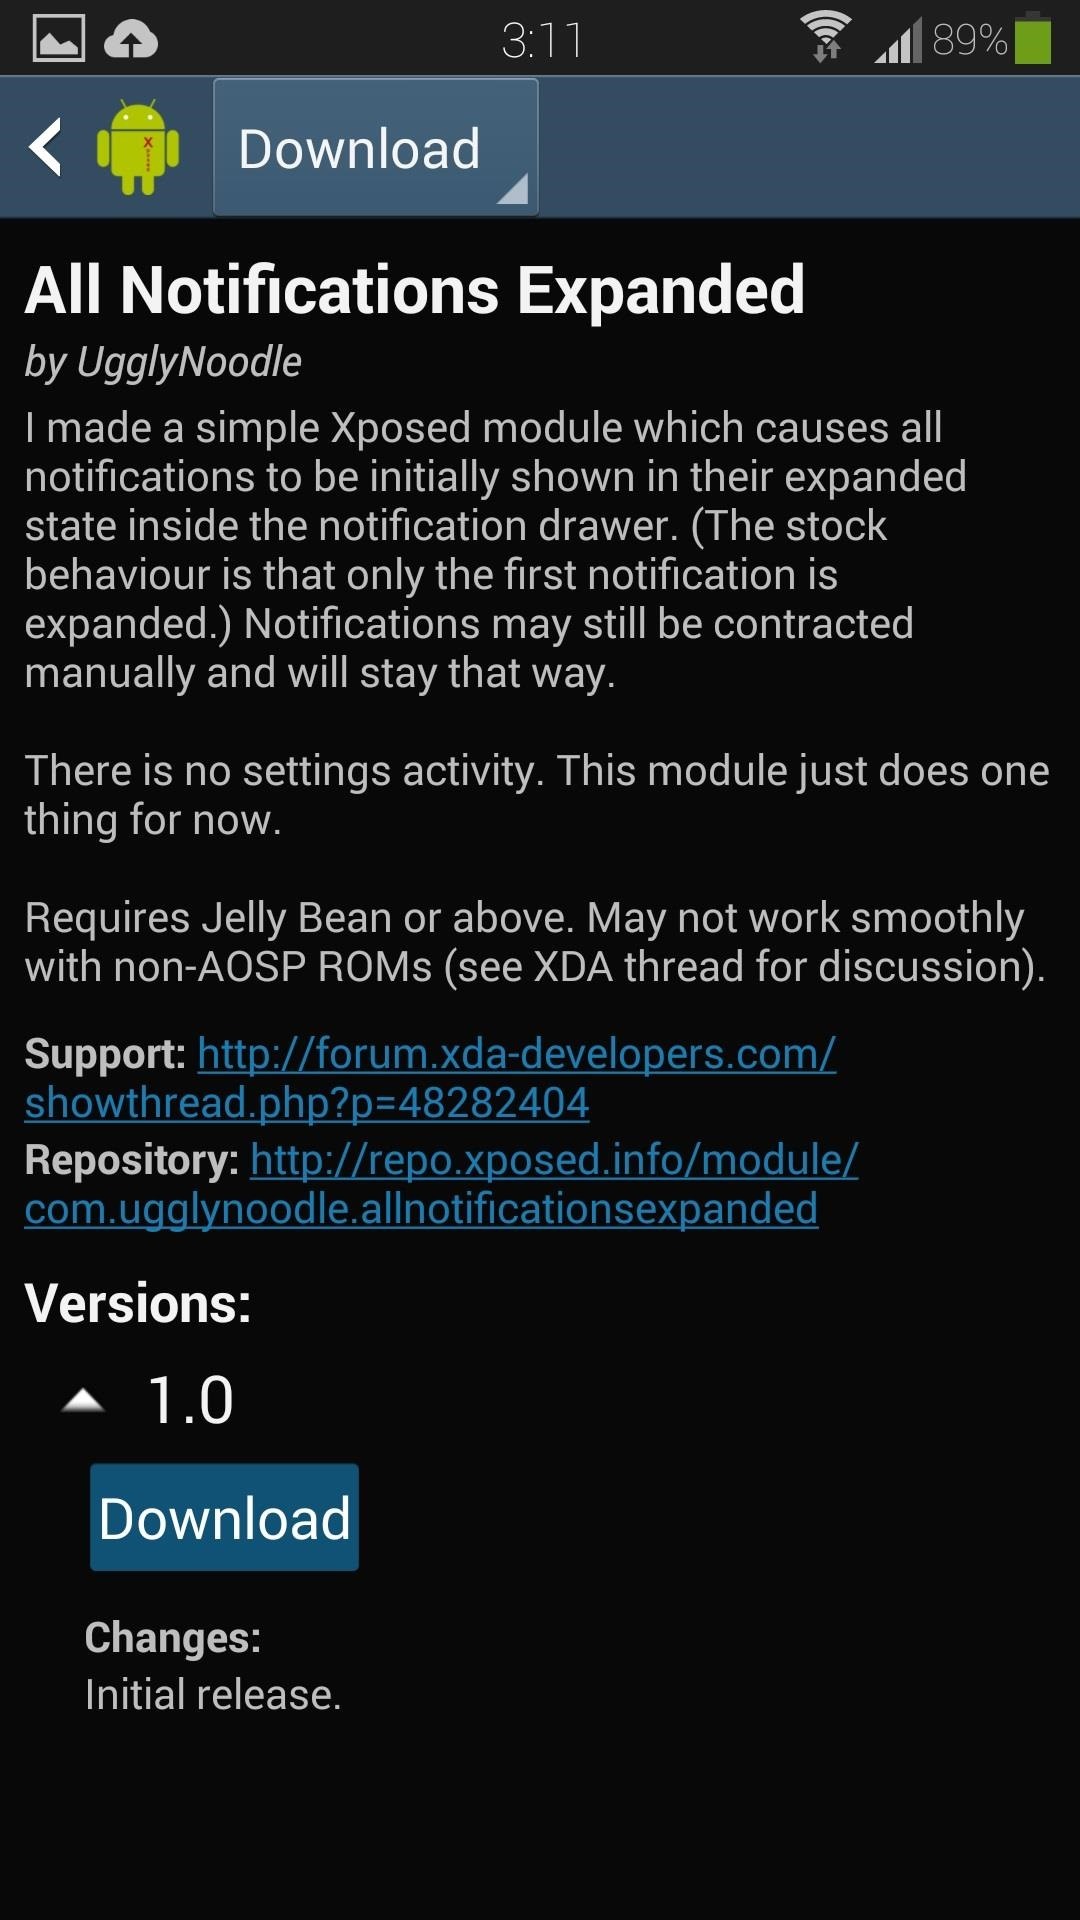 How to Get Automatically Expanded Notifications on Your Samsung Galaxy S4